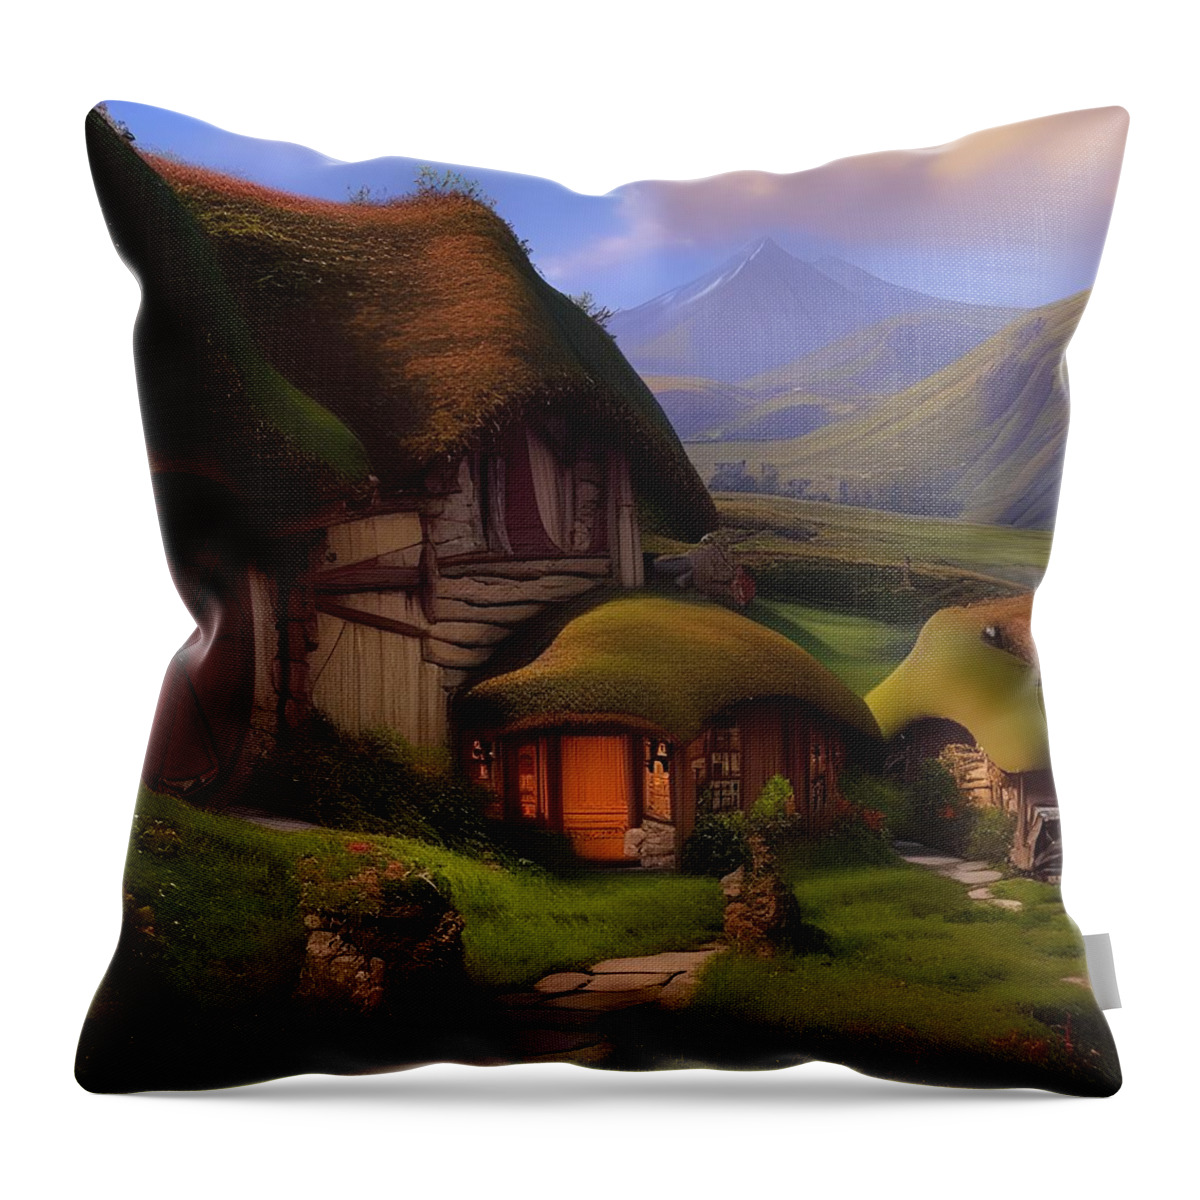 Hobbits Throw Pillow featuring the digital art A Hobbits Home by Angela Hobbs